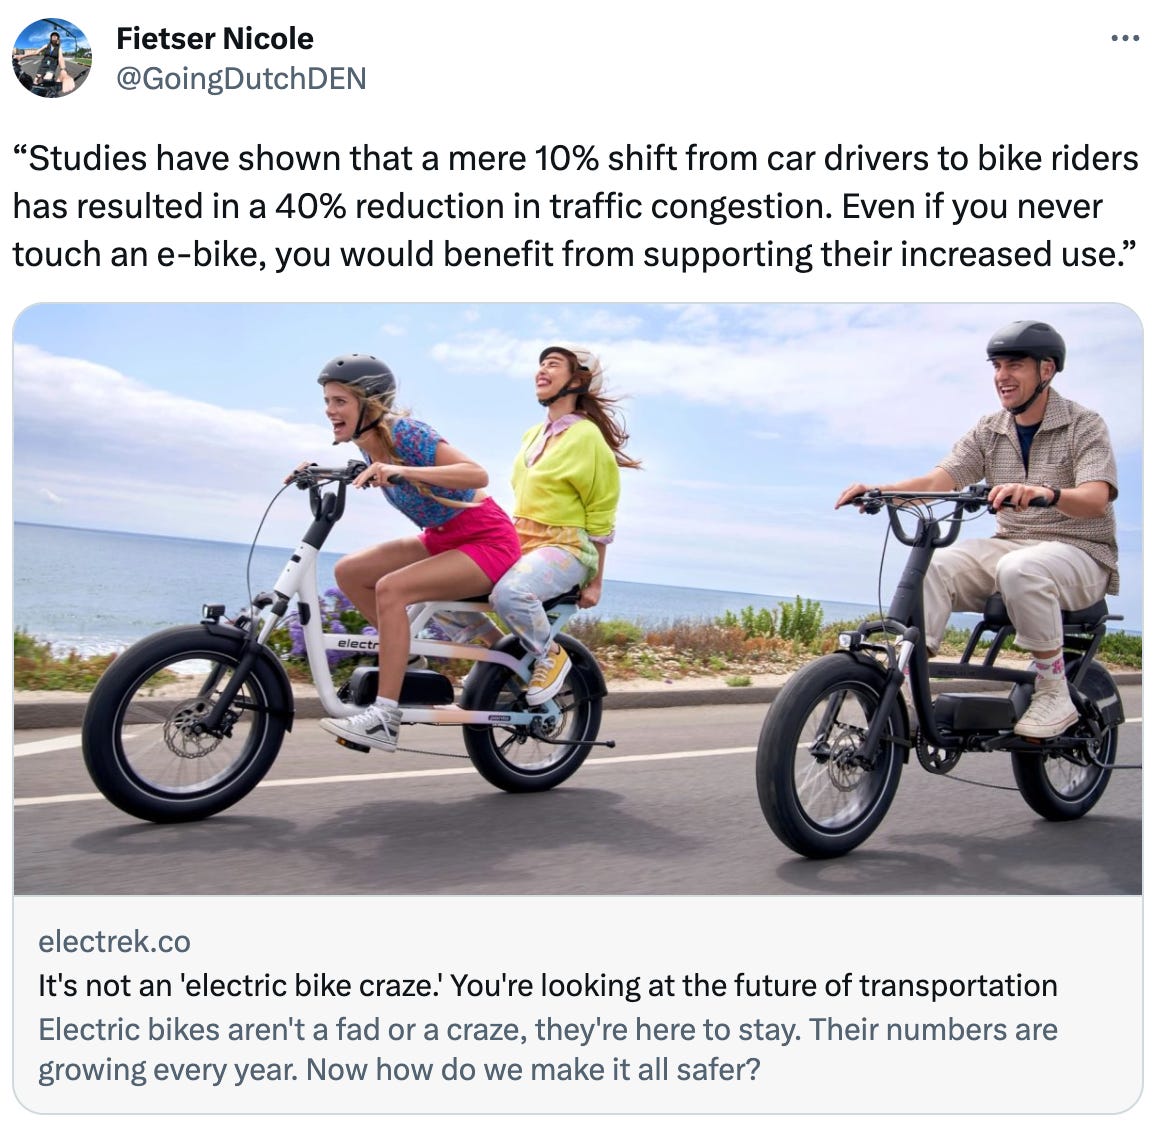  See new Tweets Conversation Fietser Nicole @GoingDutchDEN “Studies have shown that a mere 10% shift from car drivers to bike riders has resulted in a 40% reduction in traffic congestion. Even if you never touch an e-bike, you would benefit from supporting their increased use.” electrek.co It's not an 'electric bike craze.' You're looking at the future of transportation Electric bikes aren't a fad or a craze, they're here to stay. Their numbers are growing every year. Now how do we make it all safer?